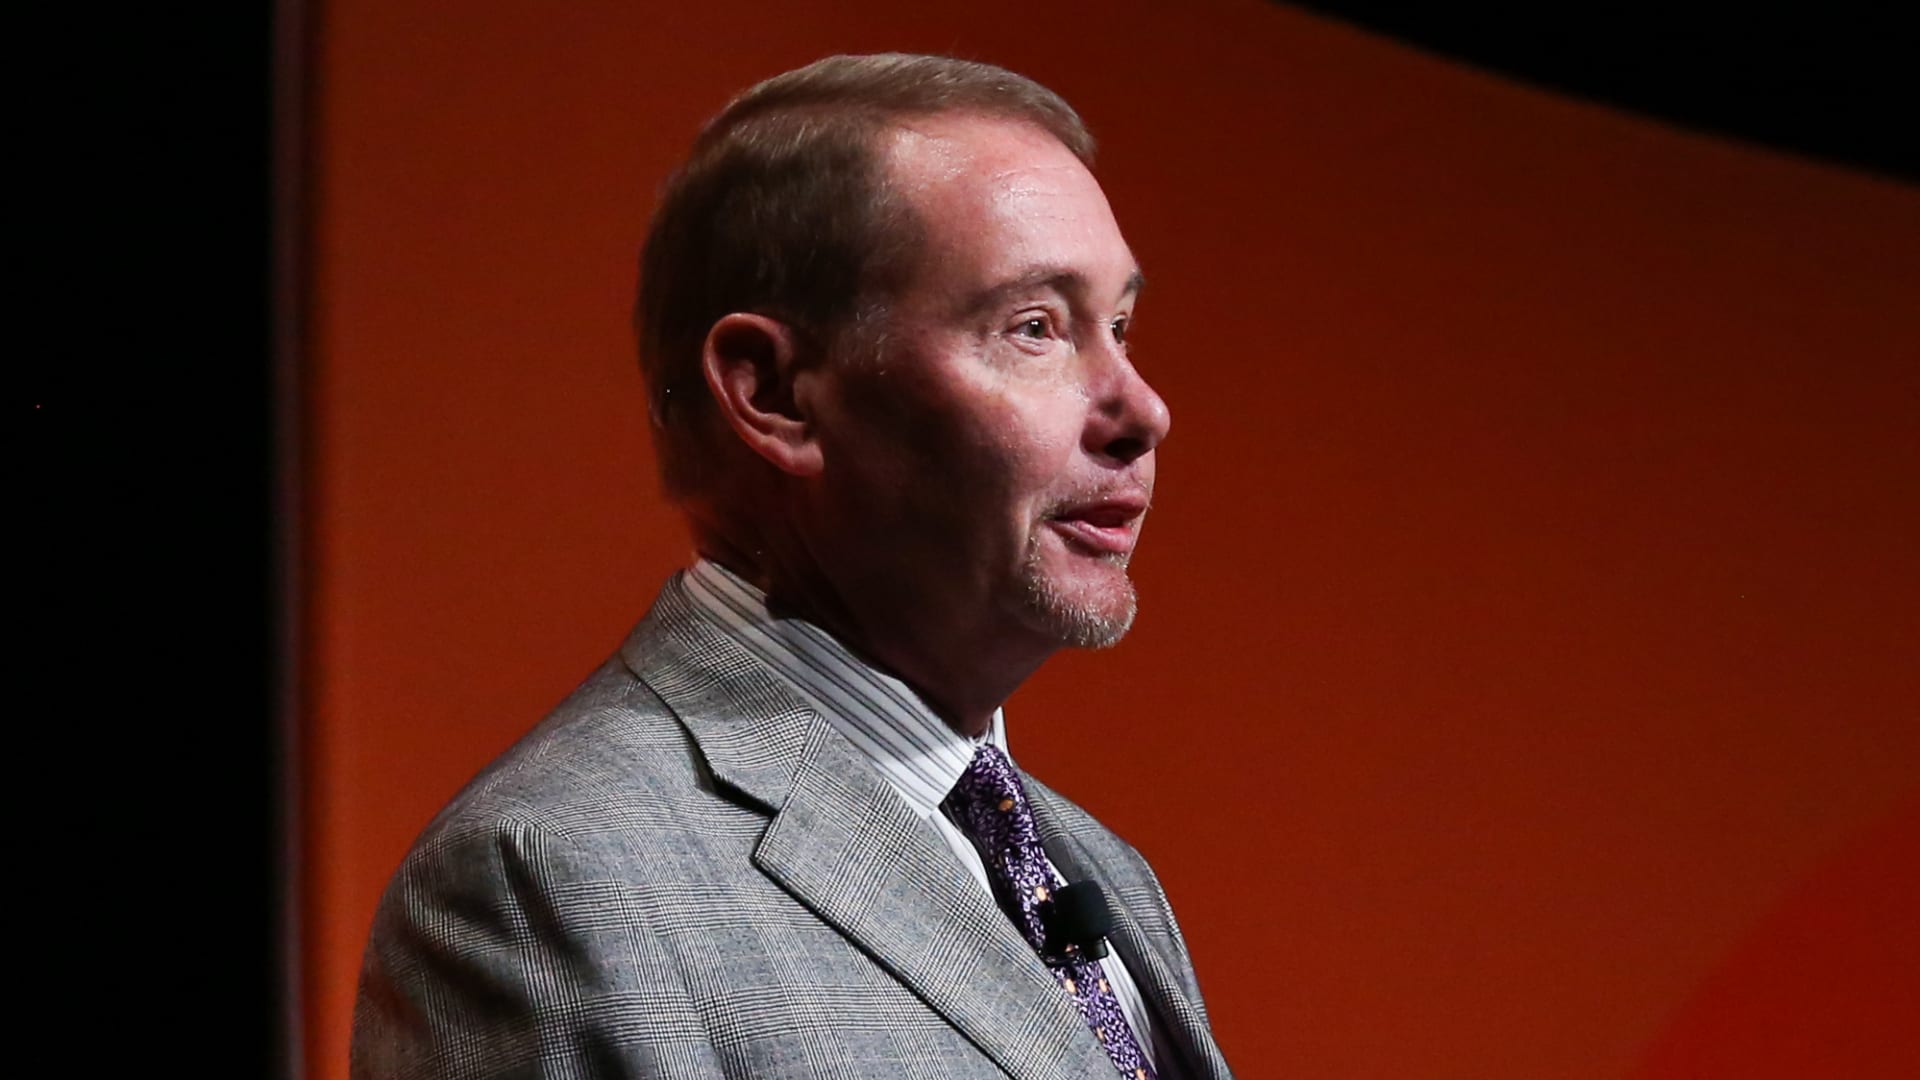 Bond king Jeffrey Gundlach calls fixed income the most attractive he’s seen in 10 years